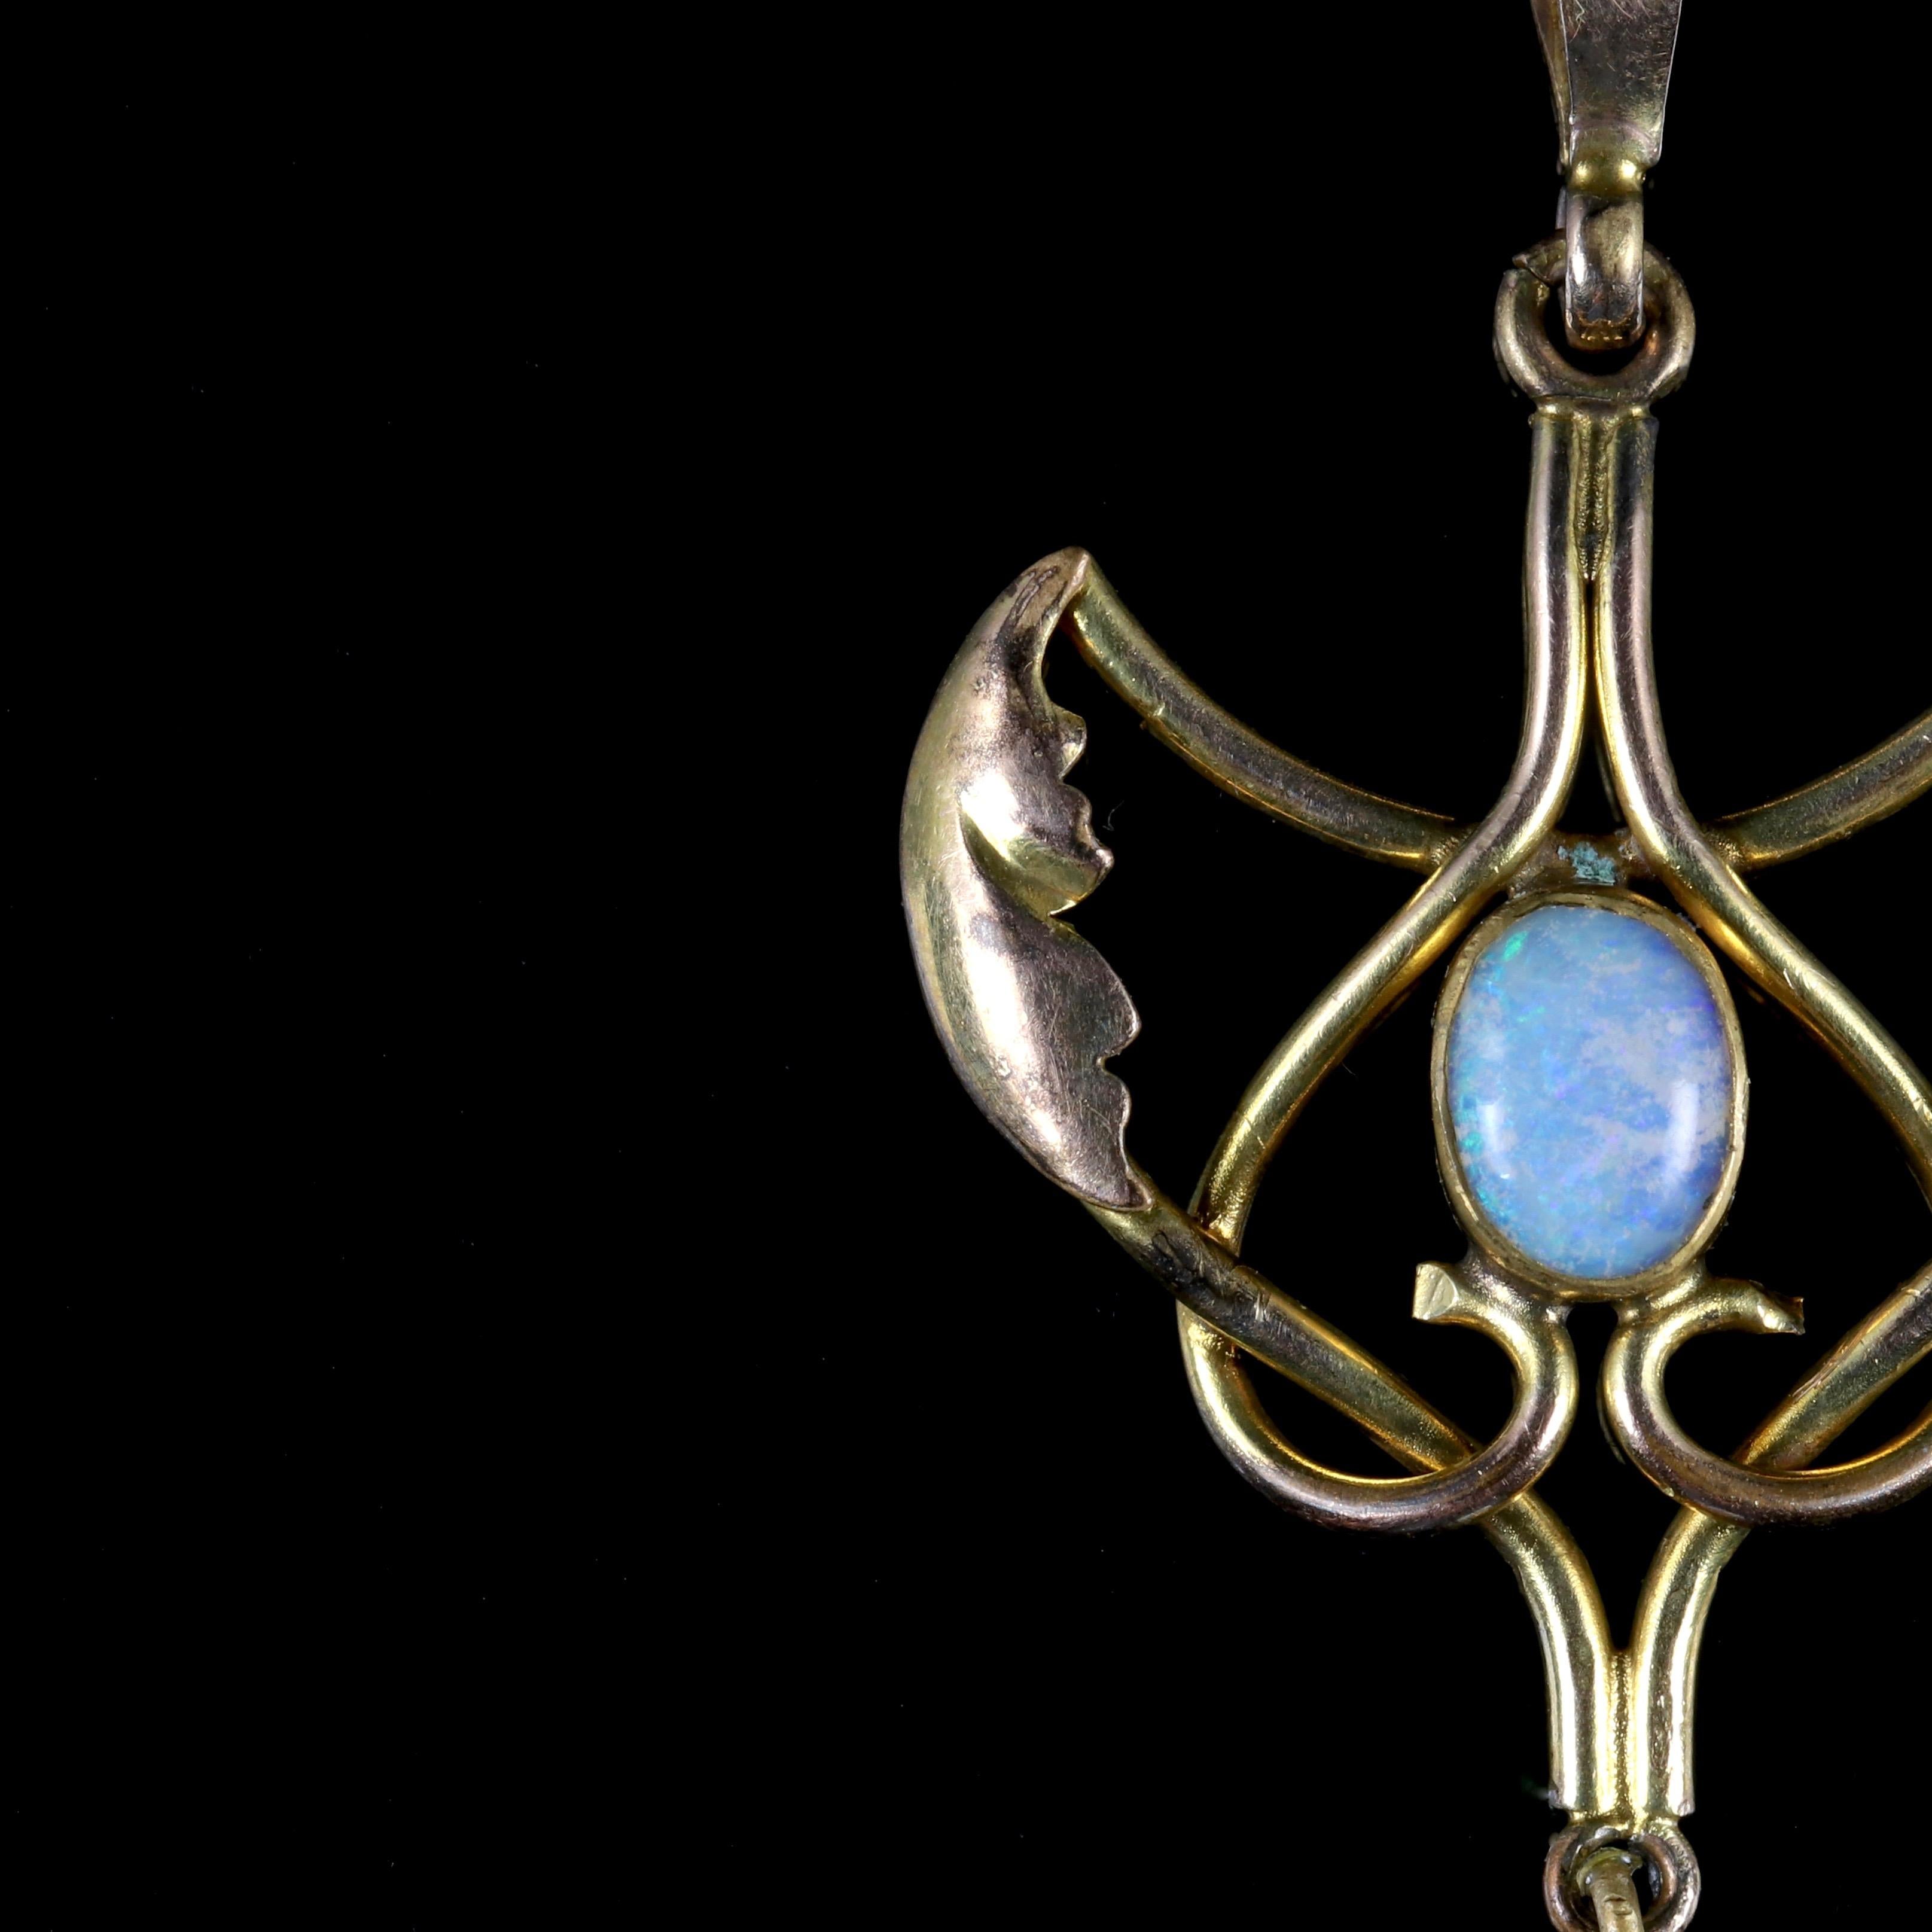 This beautiful Victorian 9ct Yellow Gold pendant is, Circa 1900.

The pendant is in an ornate design with a colourful Opal in the centre with a another Opal ball dropper. 

The Opals reflect a myriad of hues such as blues, green, pinks, turquoise as